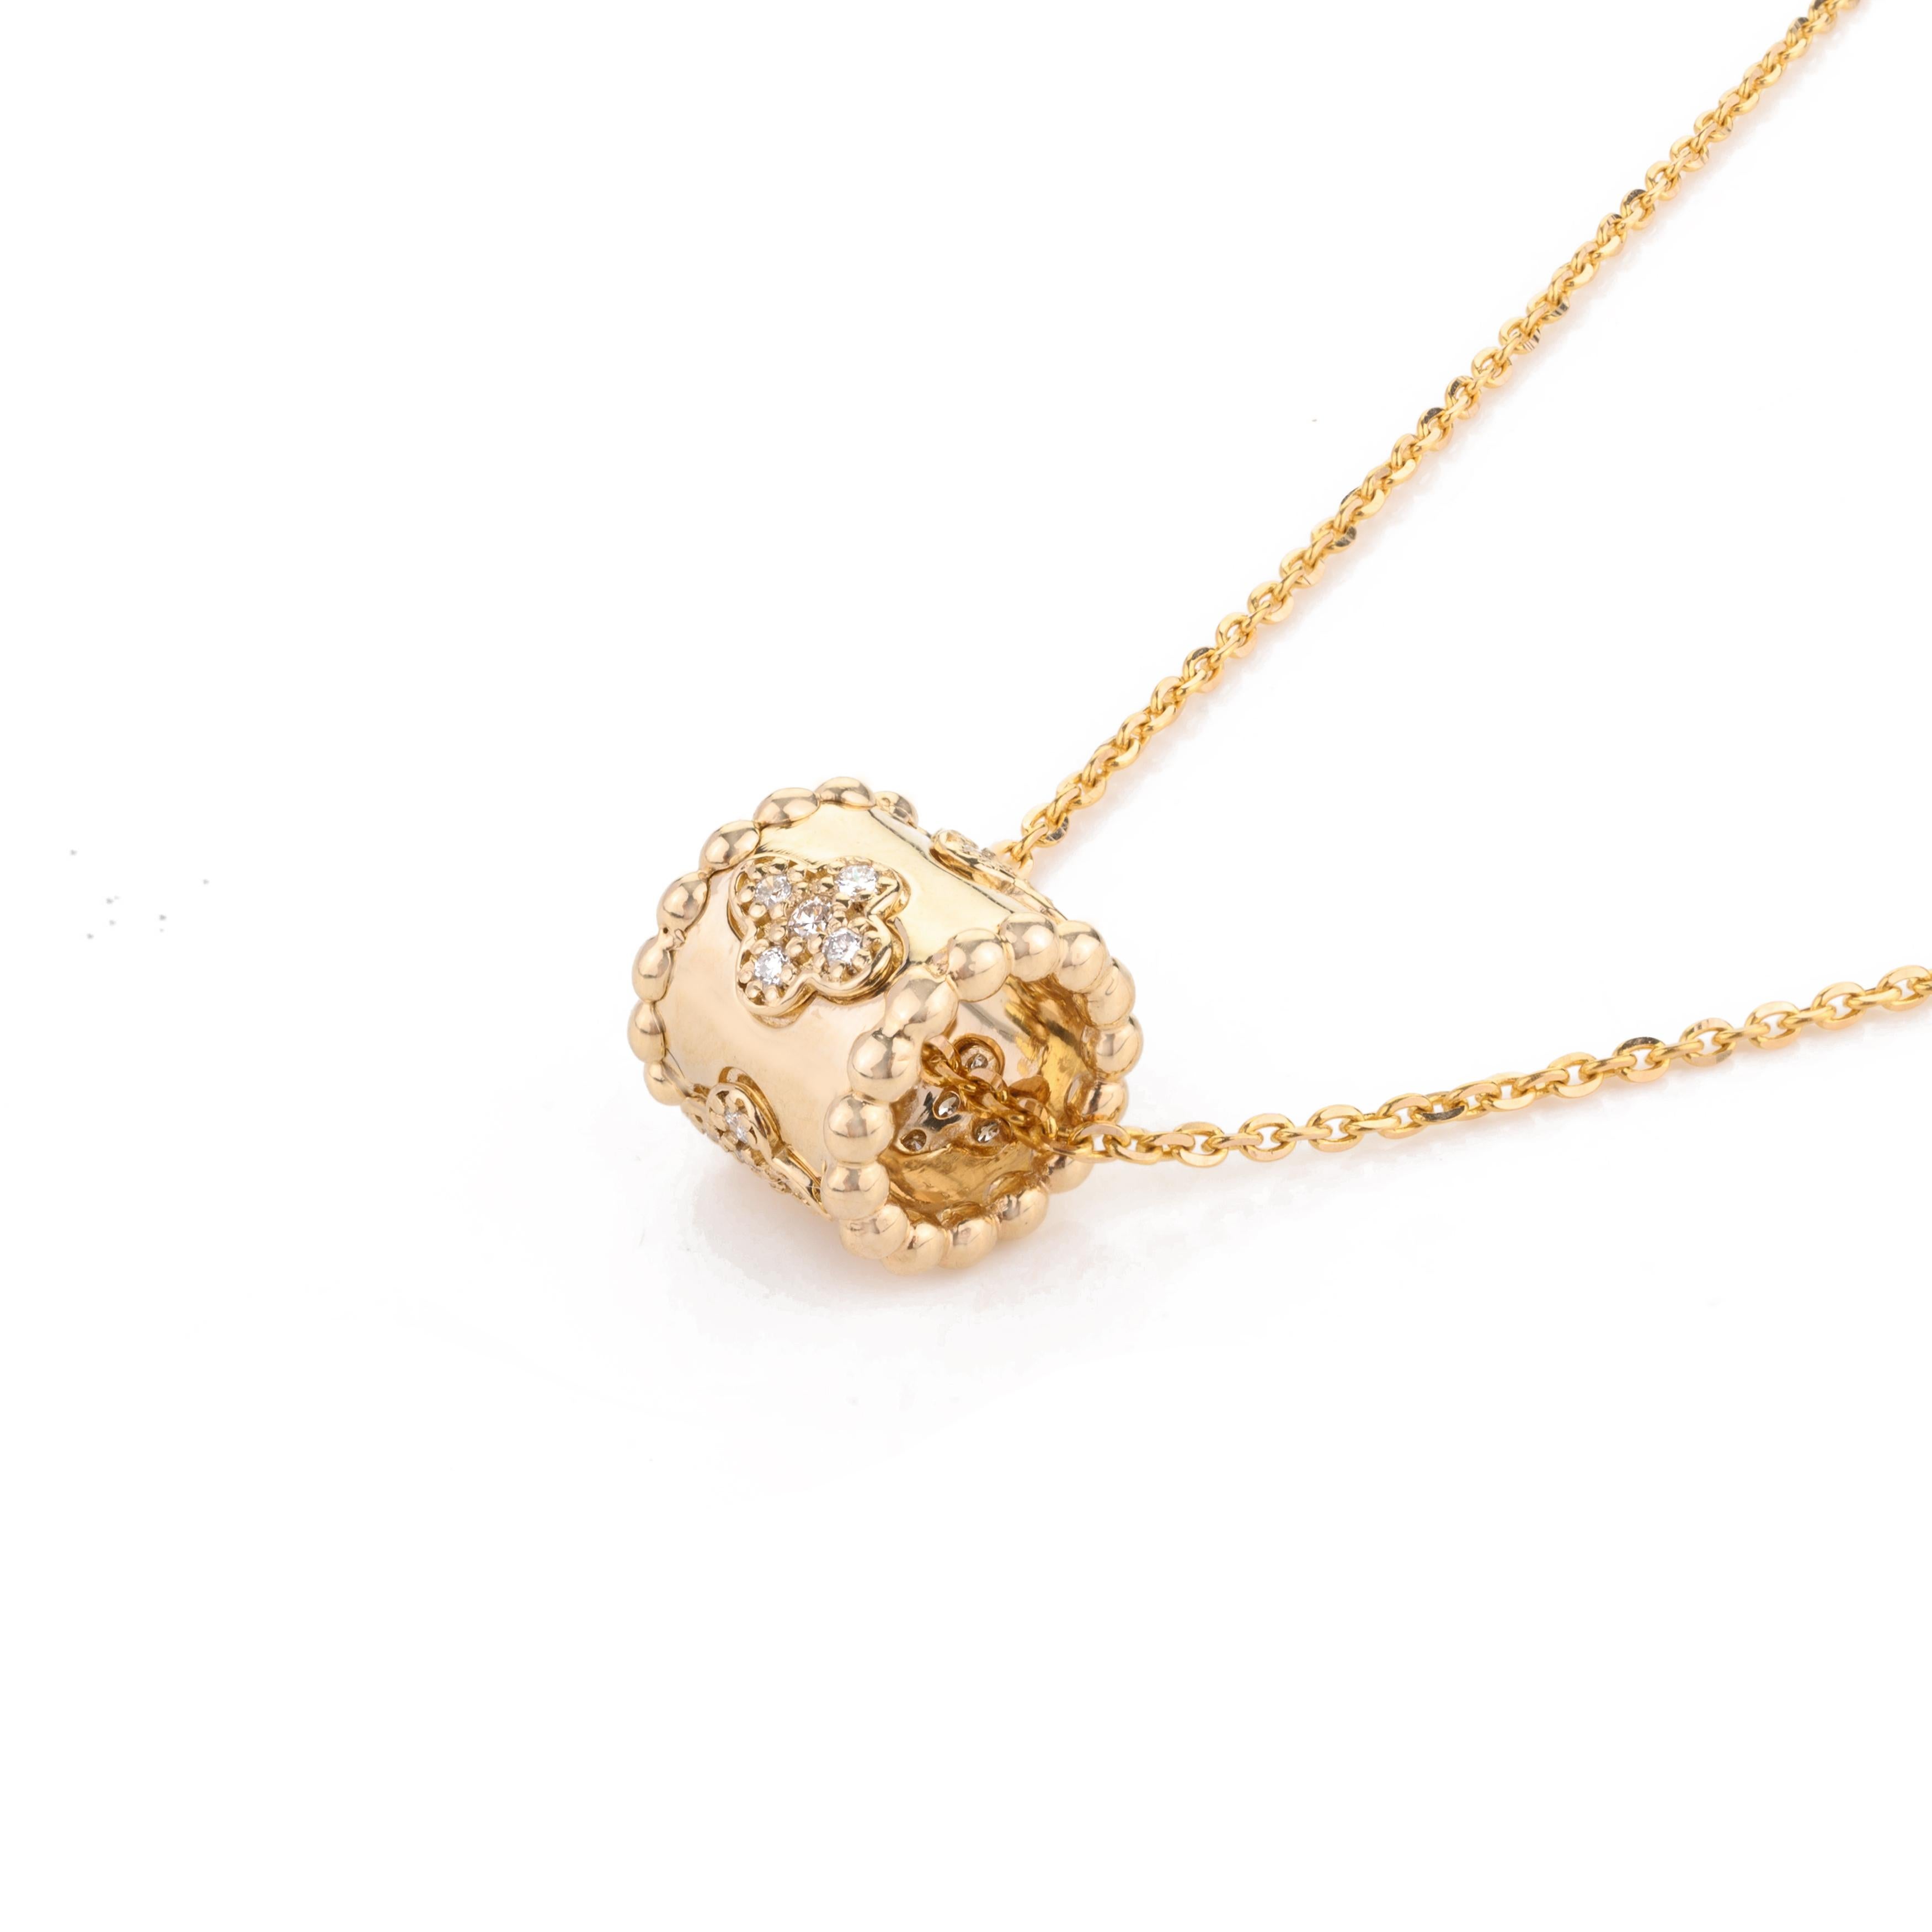 Modern Diamond Clover Roller Pendant Chain Necklace for Her in 14k Solid Yellow Gold